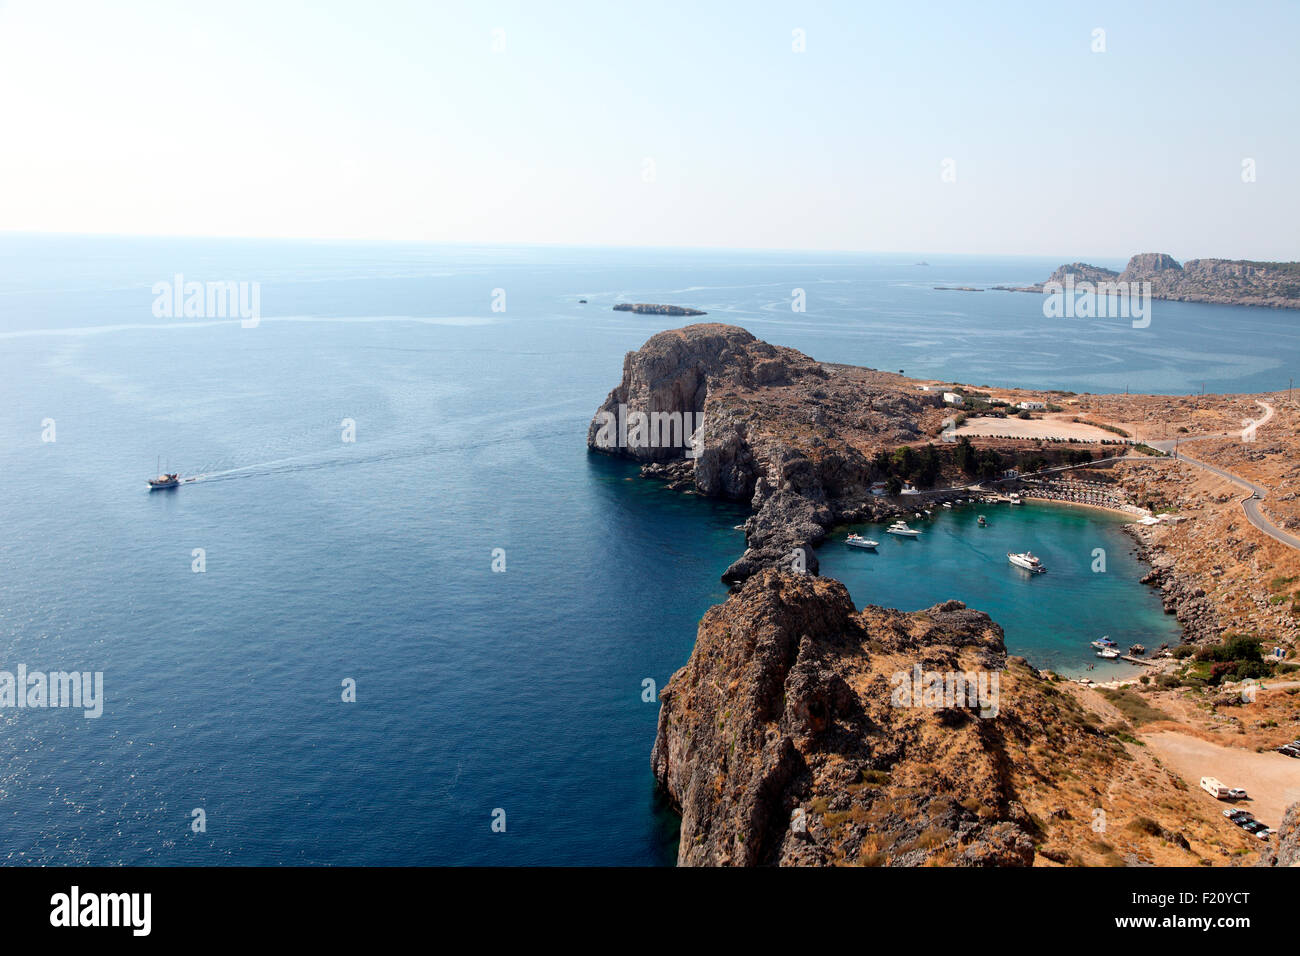 St Paul's Bay seen from the Acropolis, Lindos Stock Photo